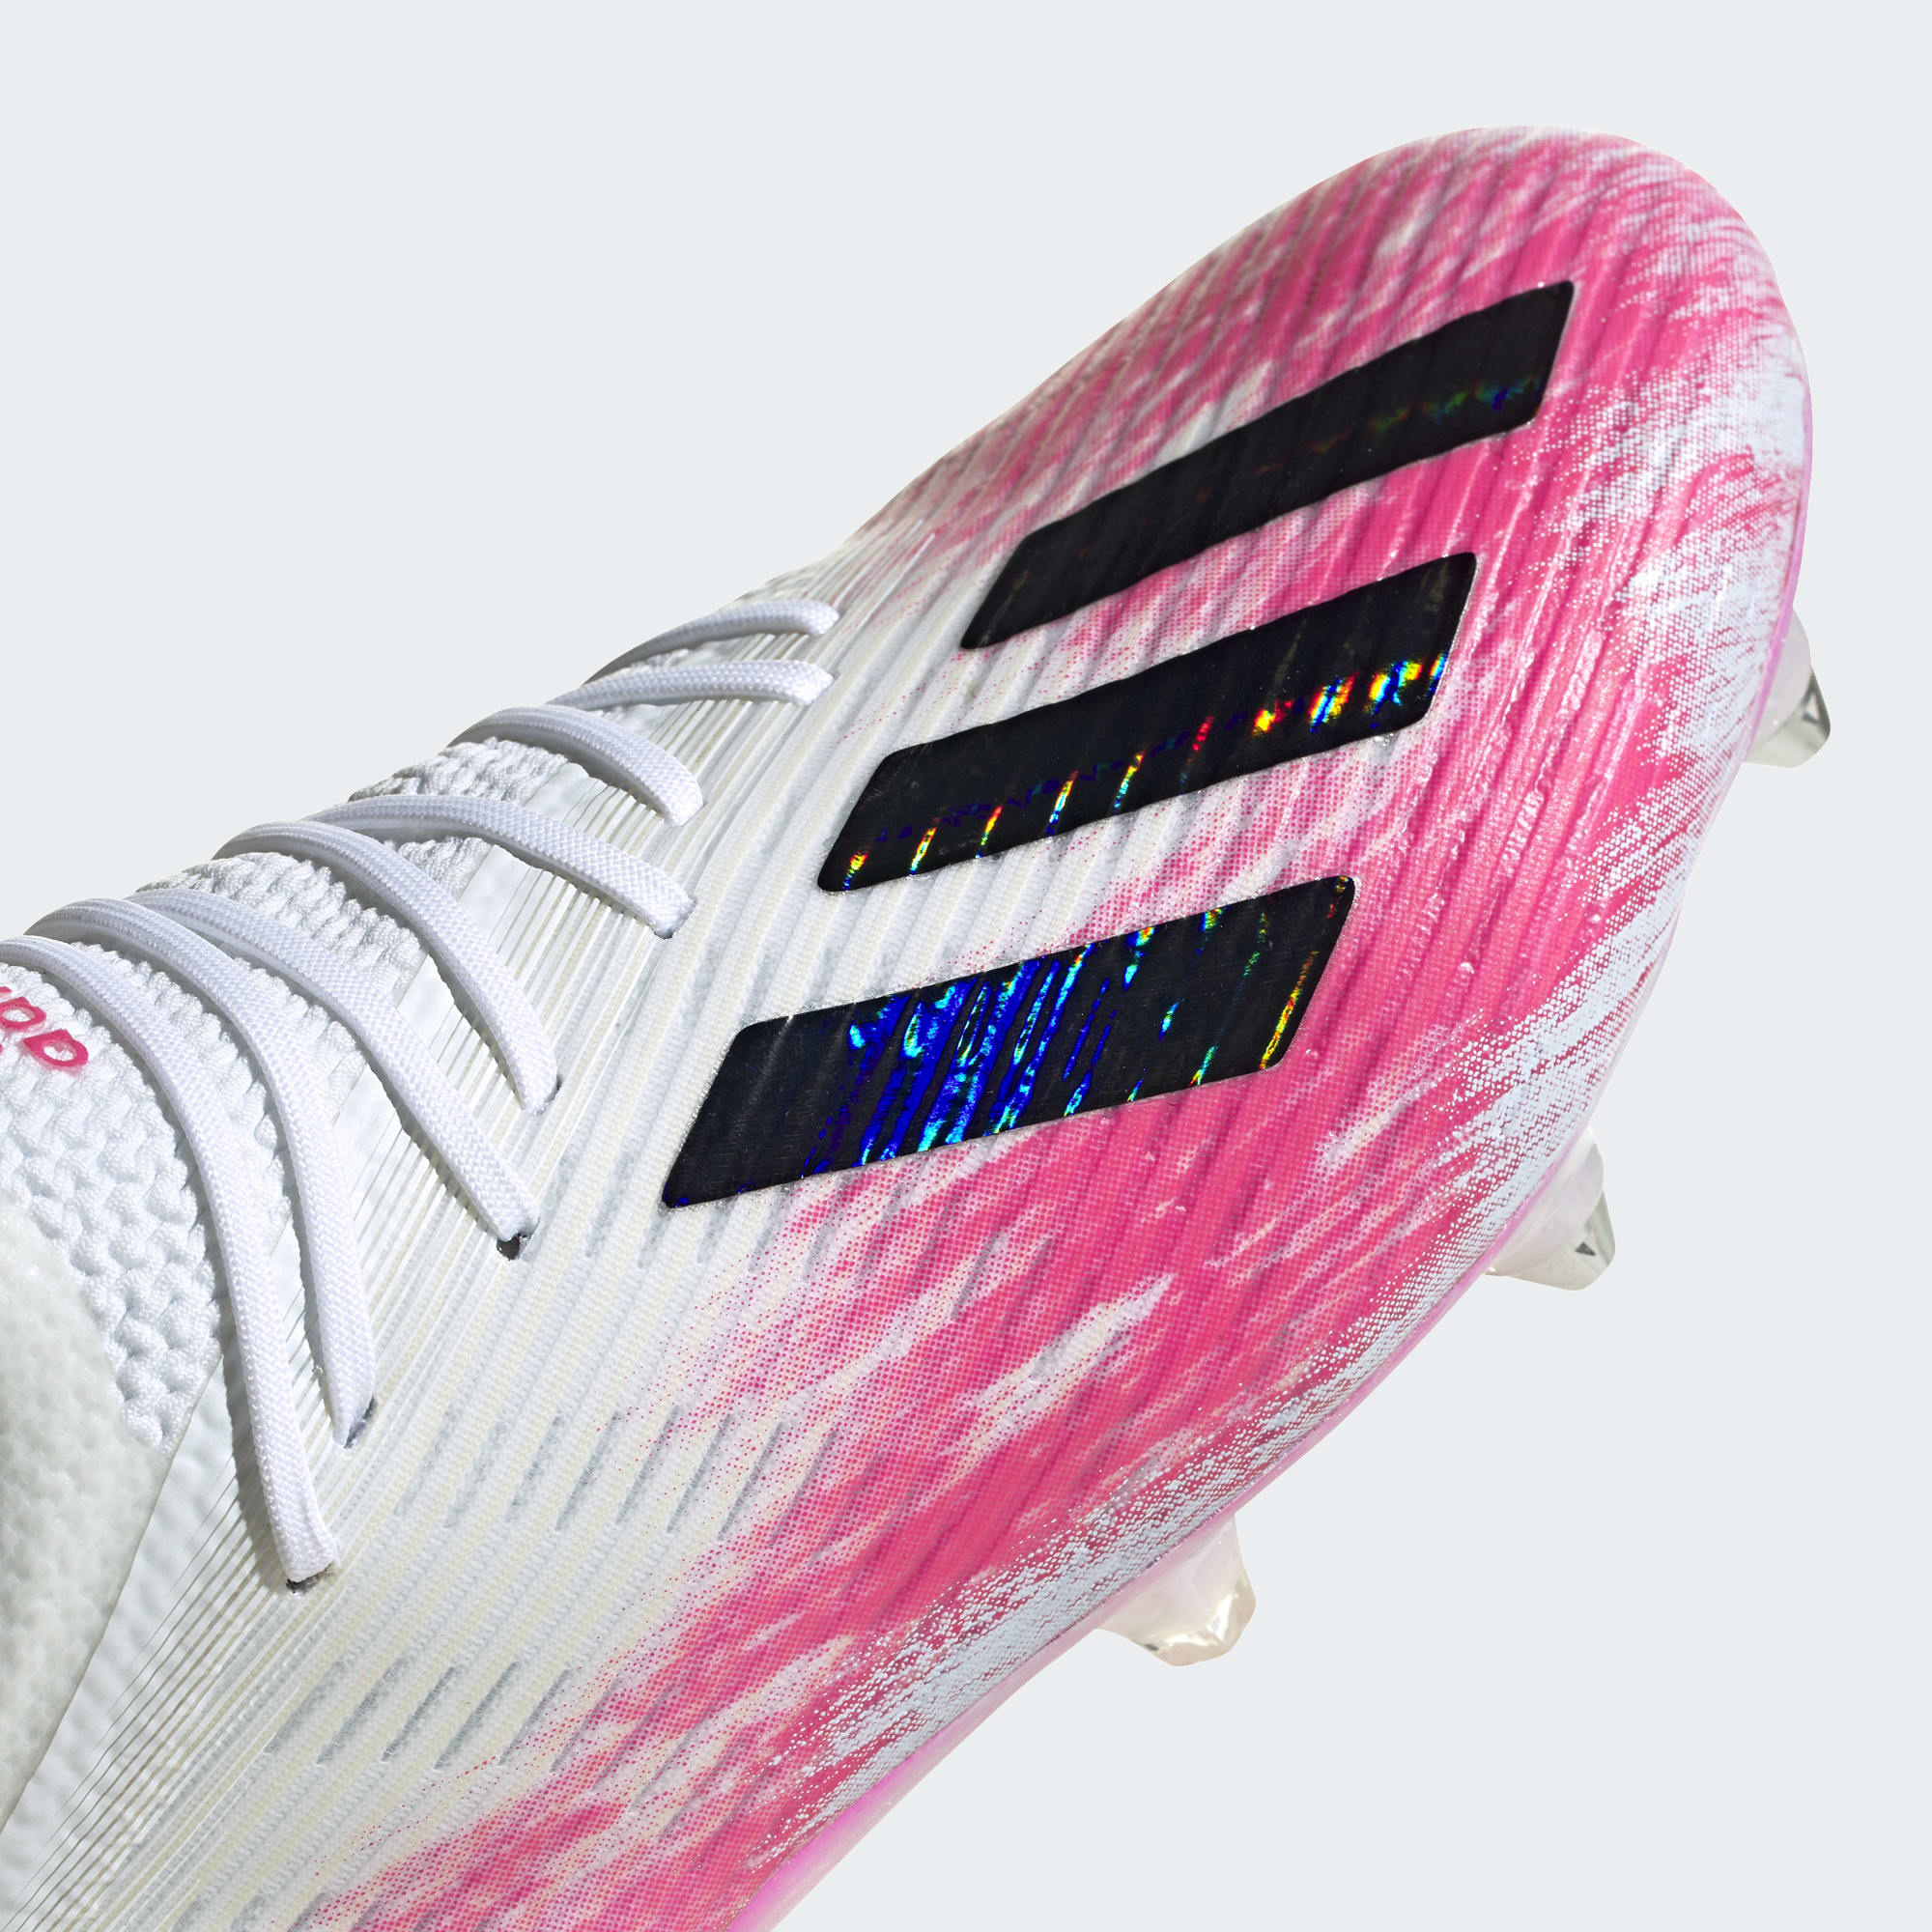 Adidas X 19 1 Sg Cloud White Core Black Shock Pink Pro Keepers Line